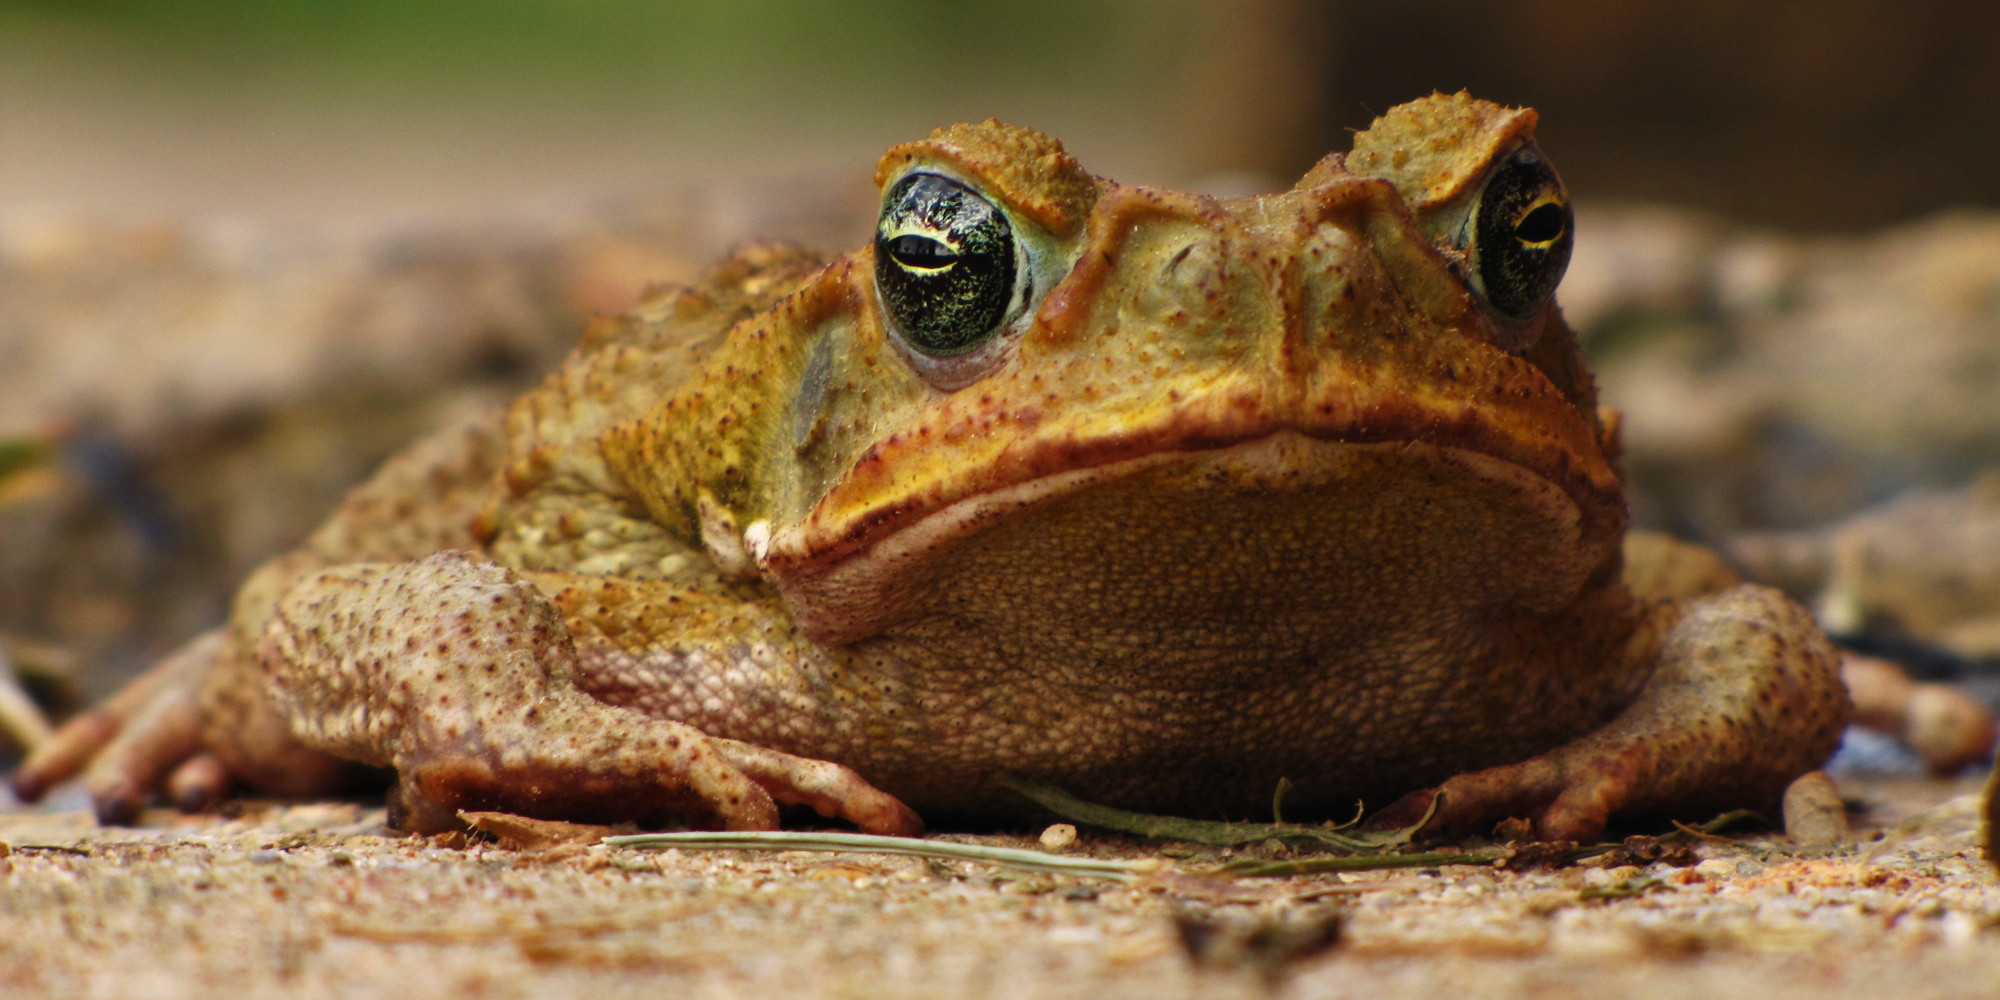 Dogs Licking Cane Toads Prompt Vets To Warn Pet Owners | HuffPost